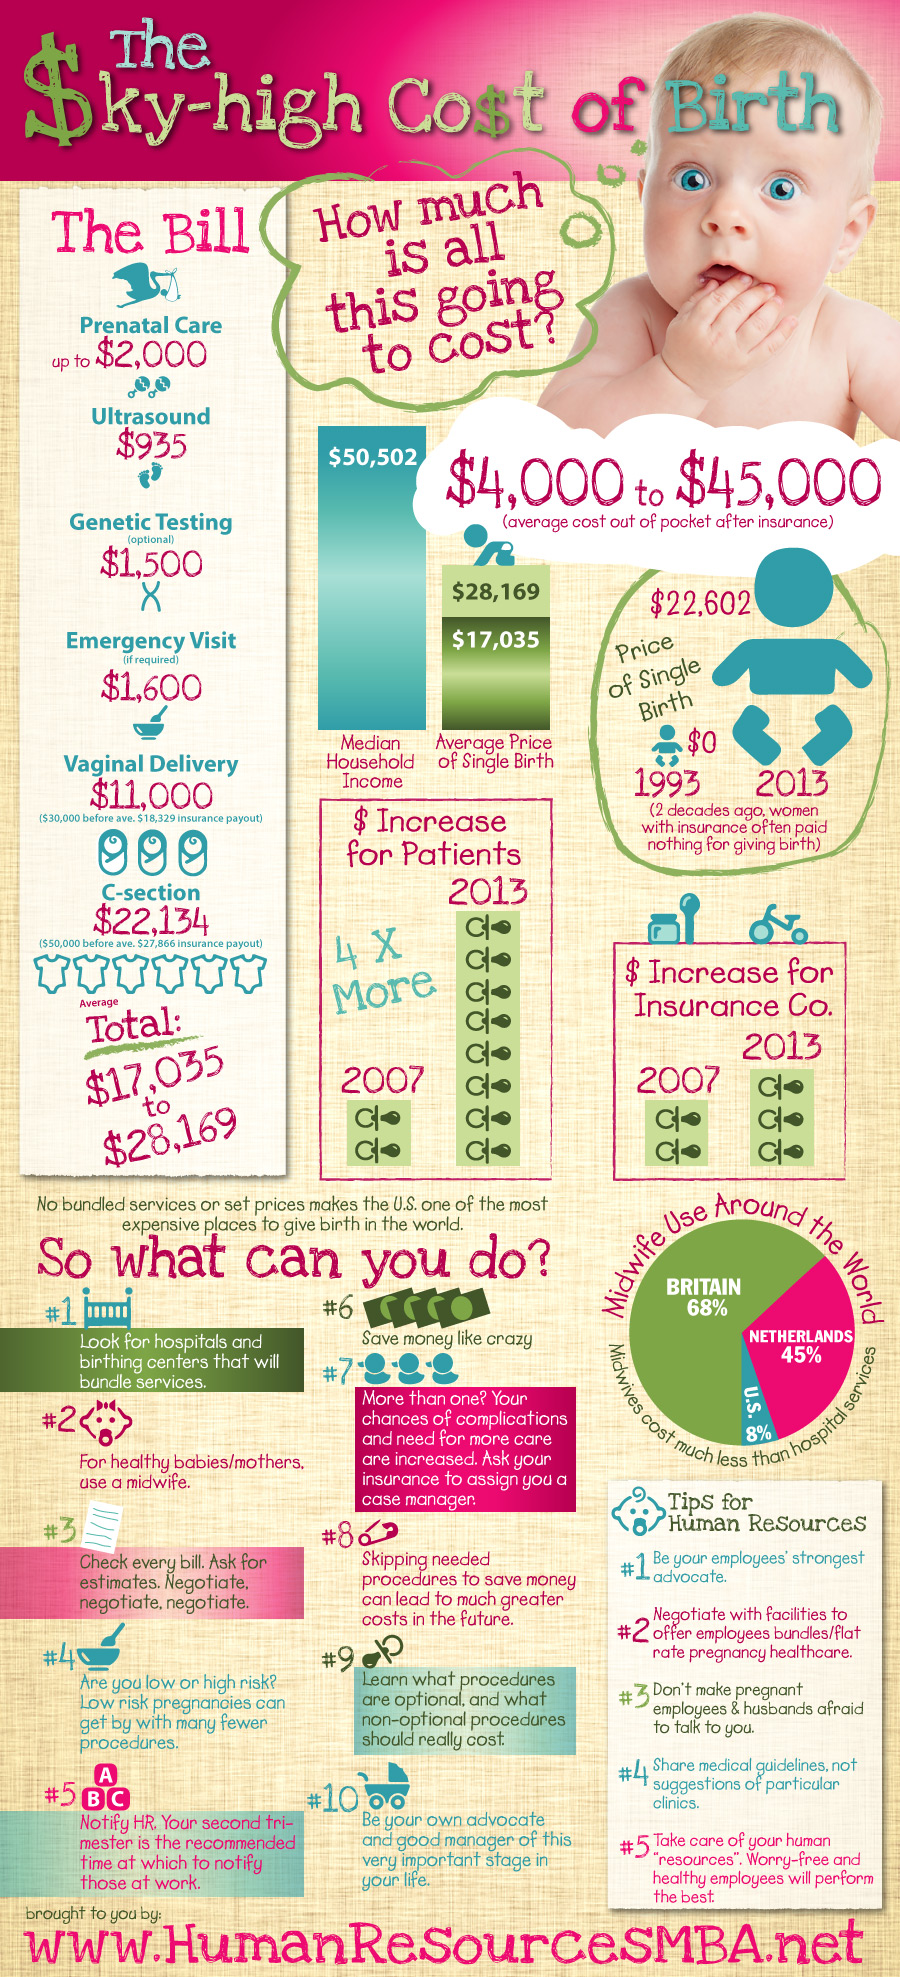 How much does it cost to give birth?